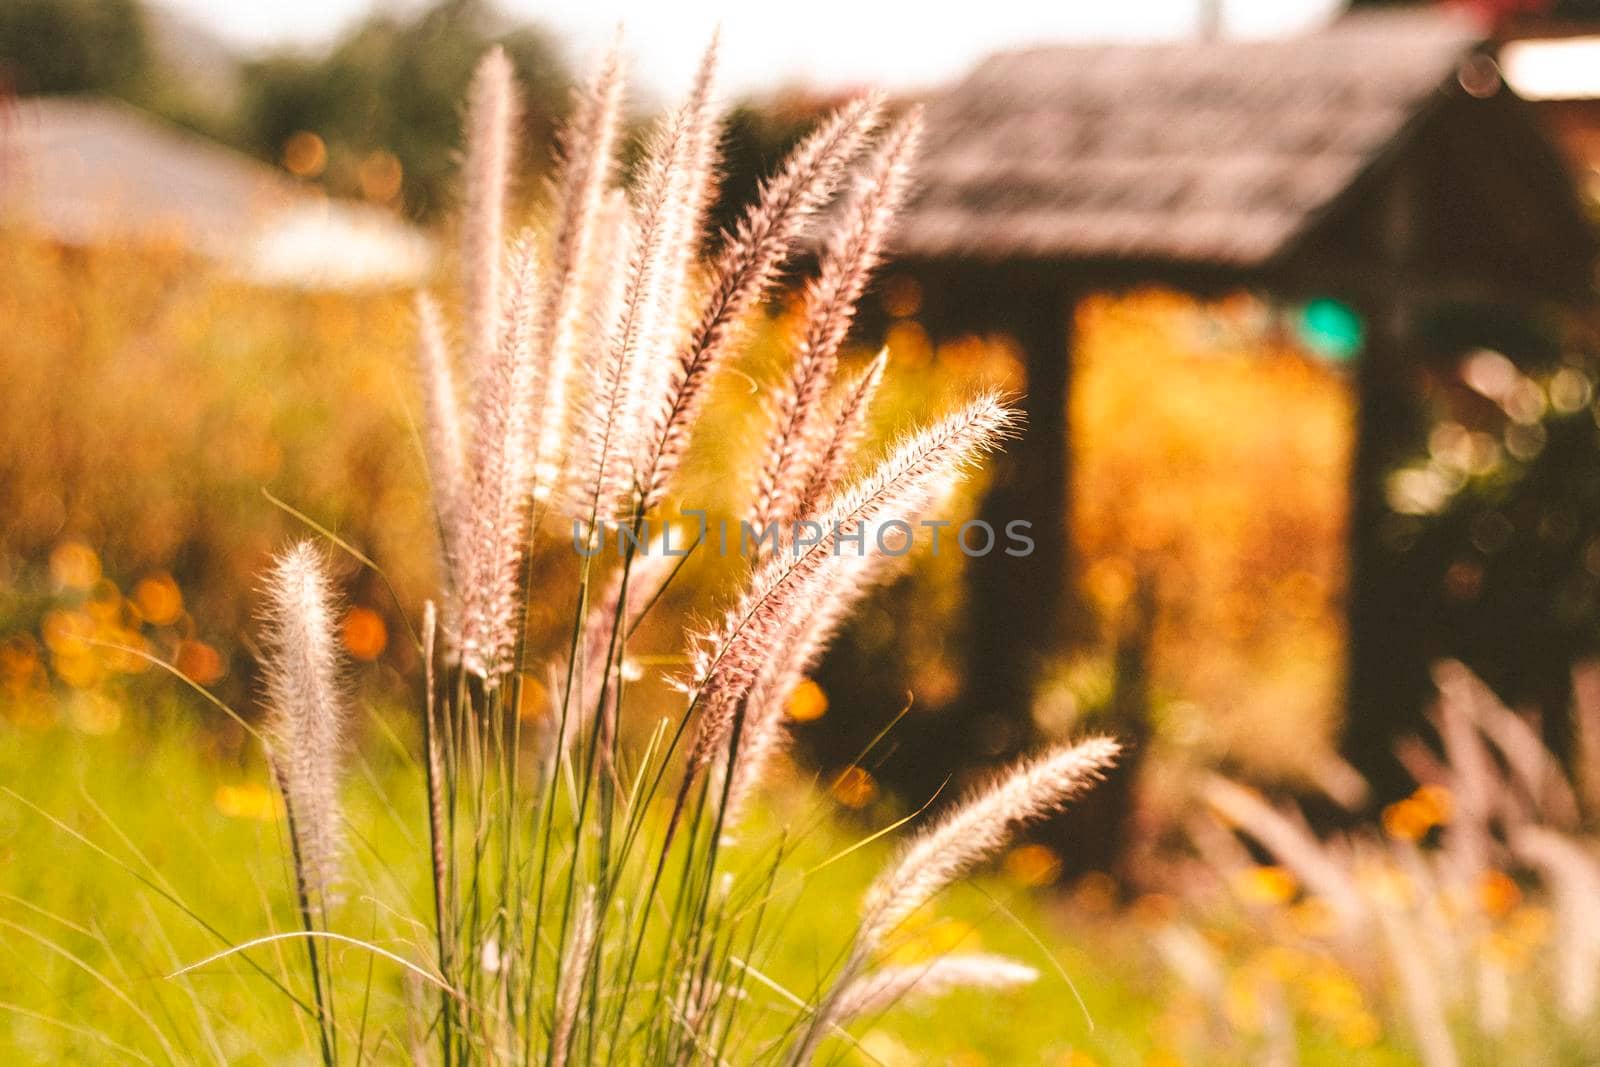 grasses blowing in wind on  motion blur yellow field  background .farmland background for holiday by Petrichor